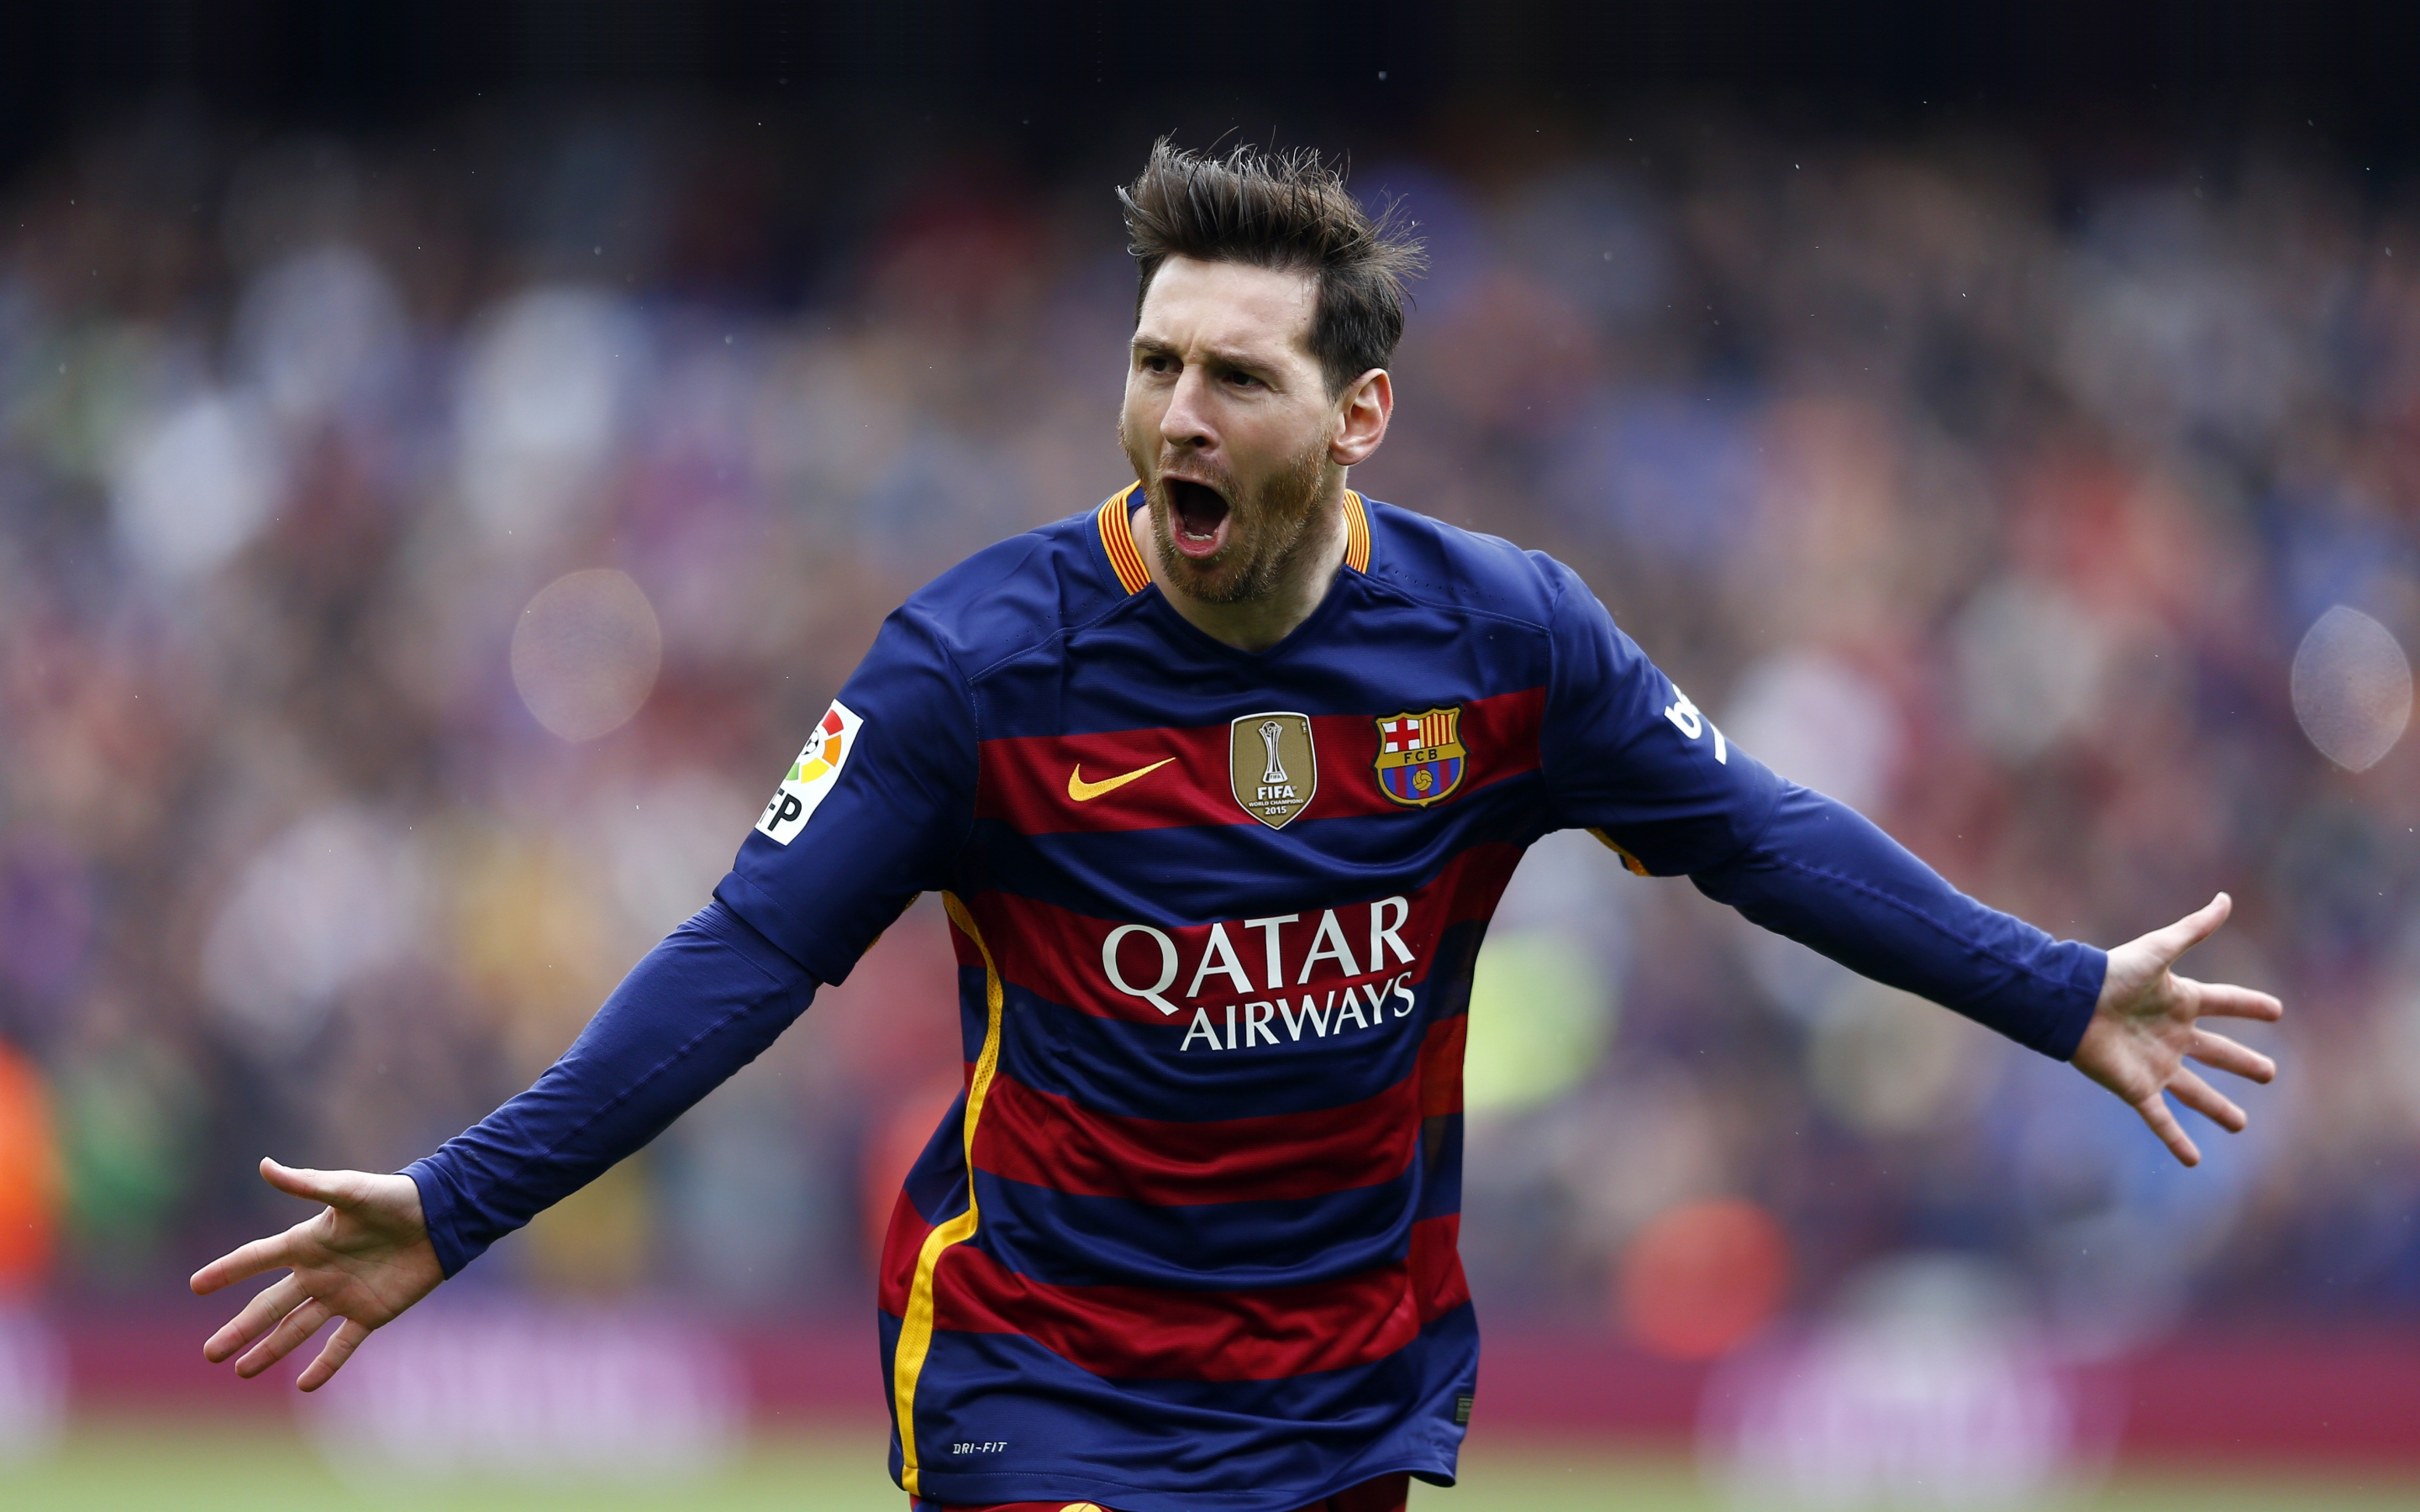 Lionel Messi, goal, celebrity, football player, 2880x1800 wallpaper